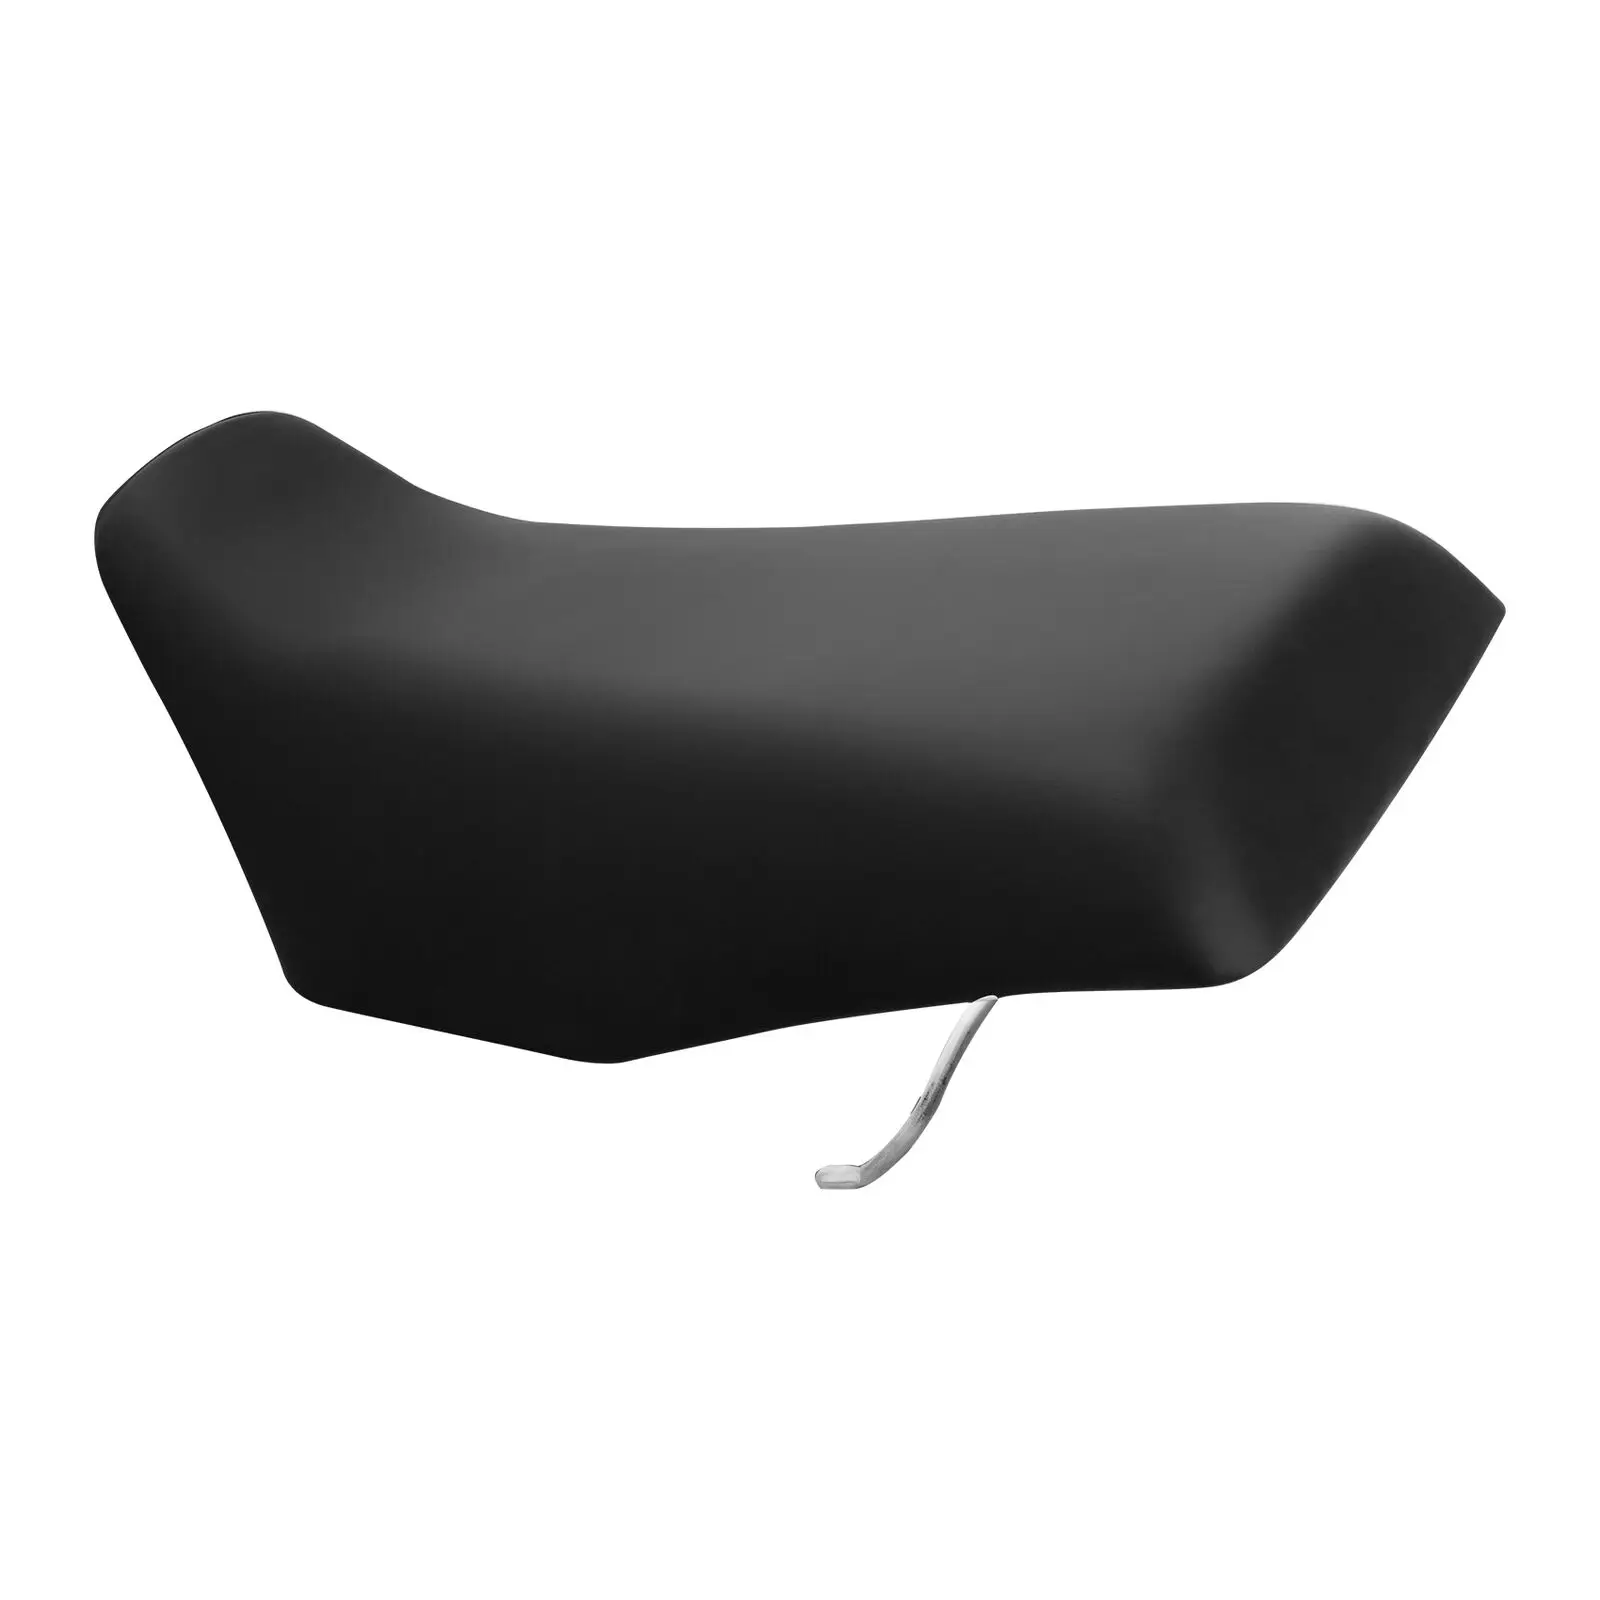 

Motorcycle Complete Seat Black For Honda TRX300 Fourtrax300 1988-2000 1989 90 91 92 93 94 95 96 97 98 99